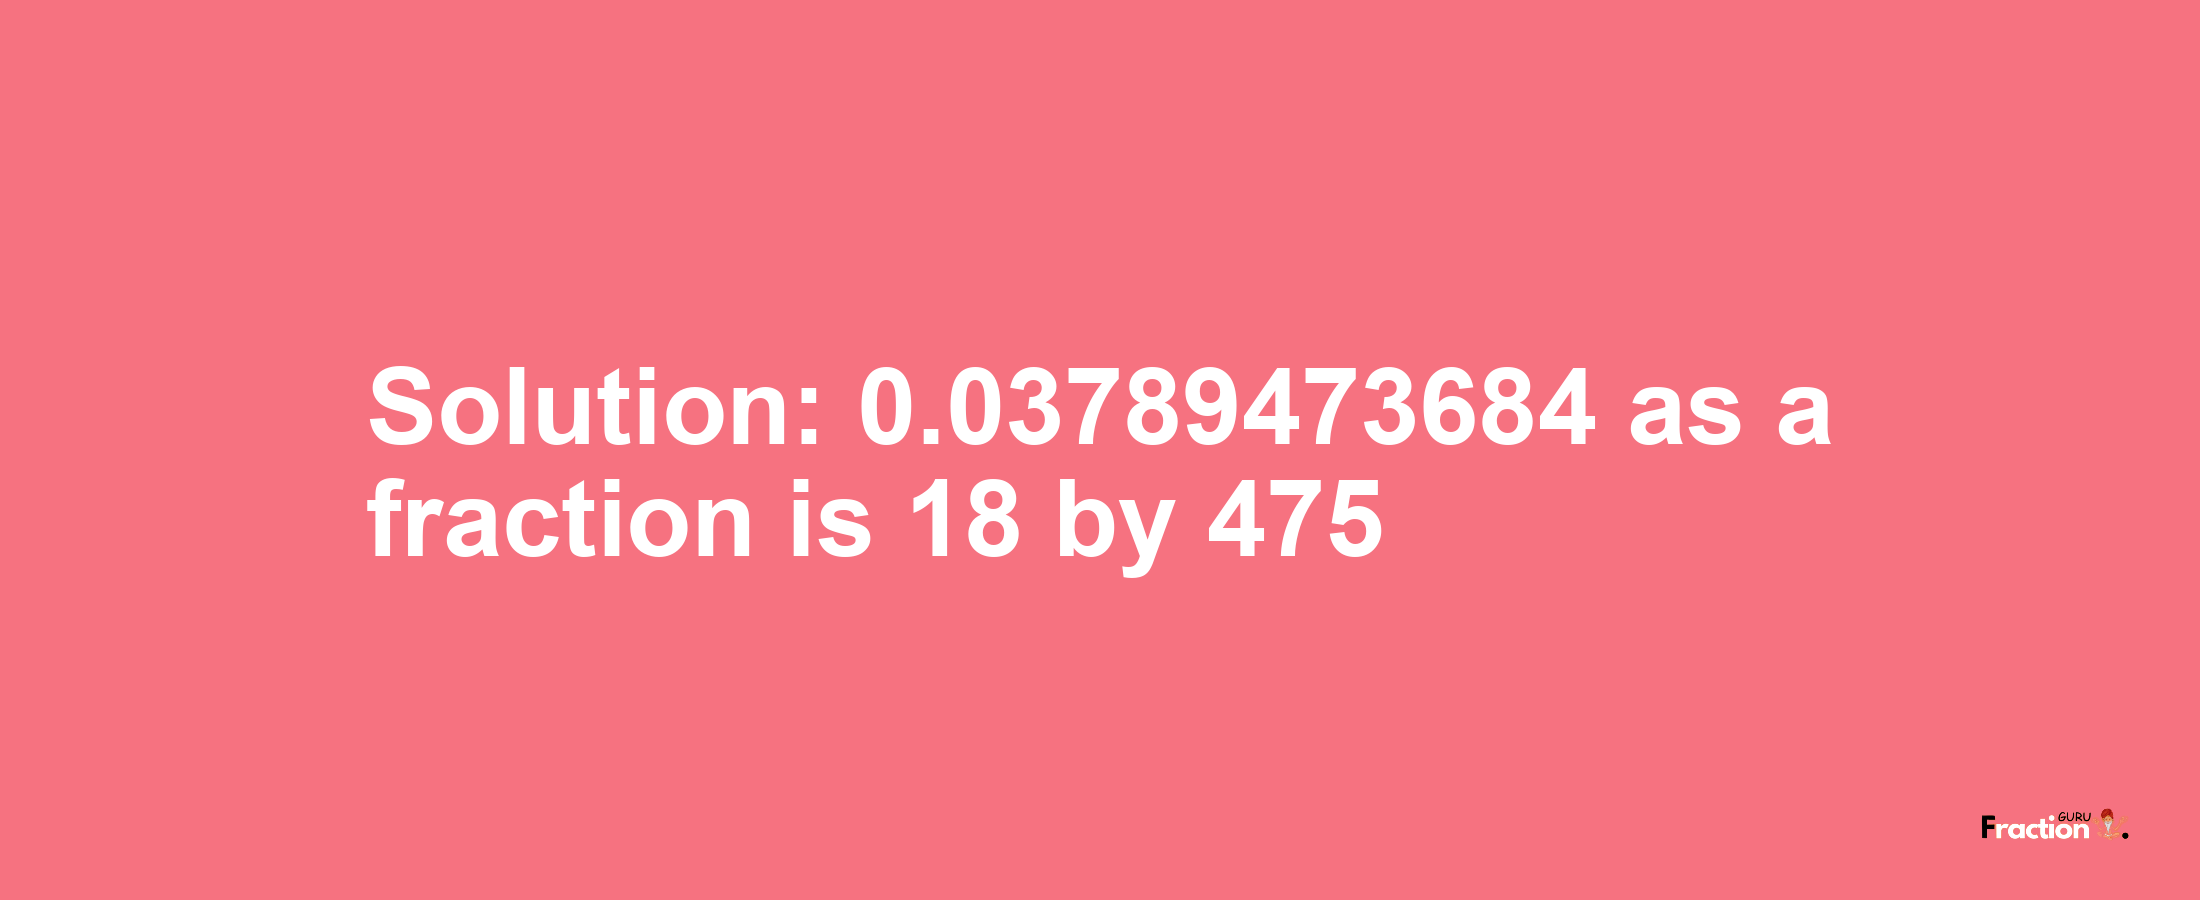 Solution:0.03789473684 as a fraction is 18/475